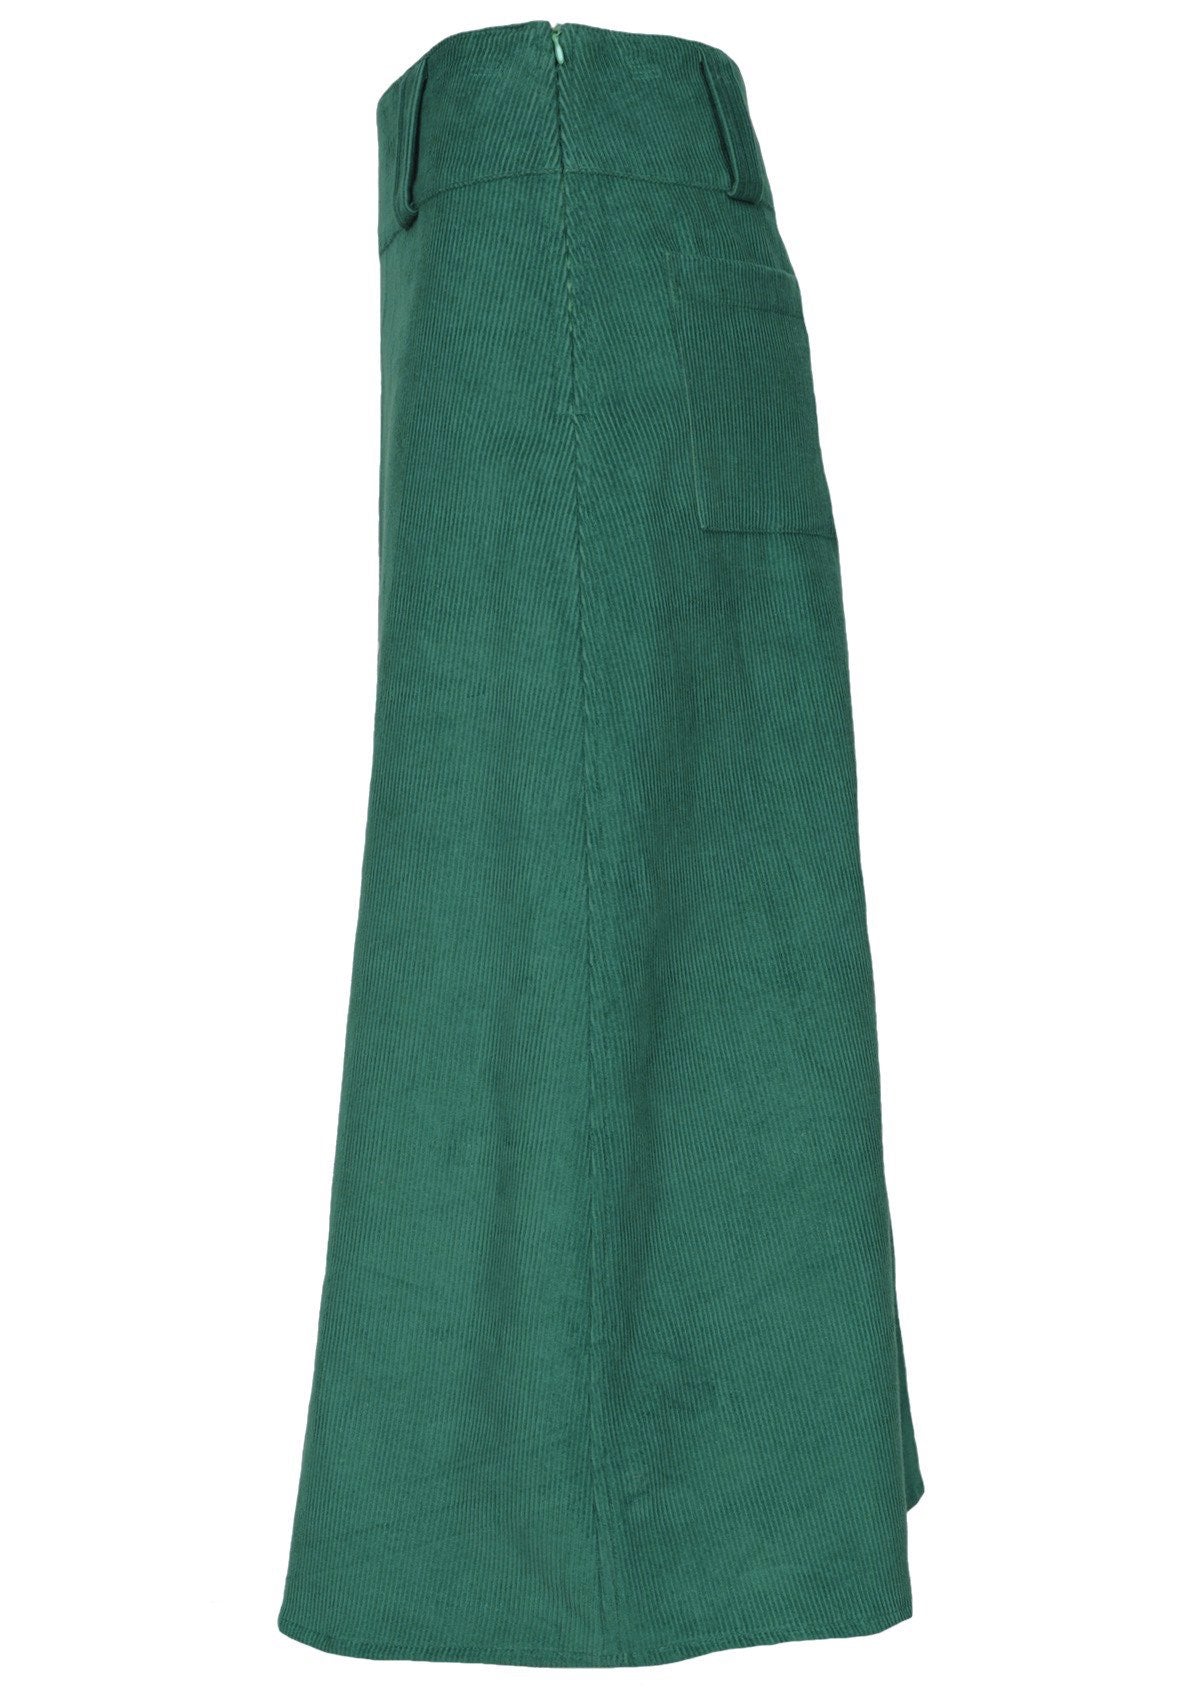 100% cotton corduroy skirt features a wide waistband yoke with belt loops. 